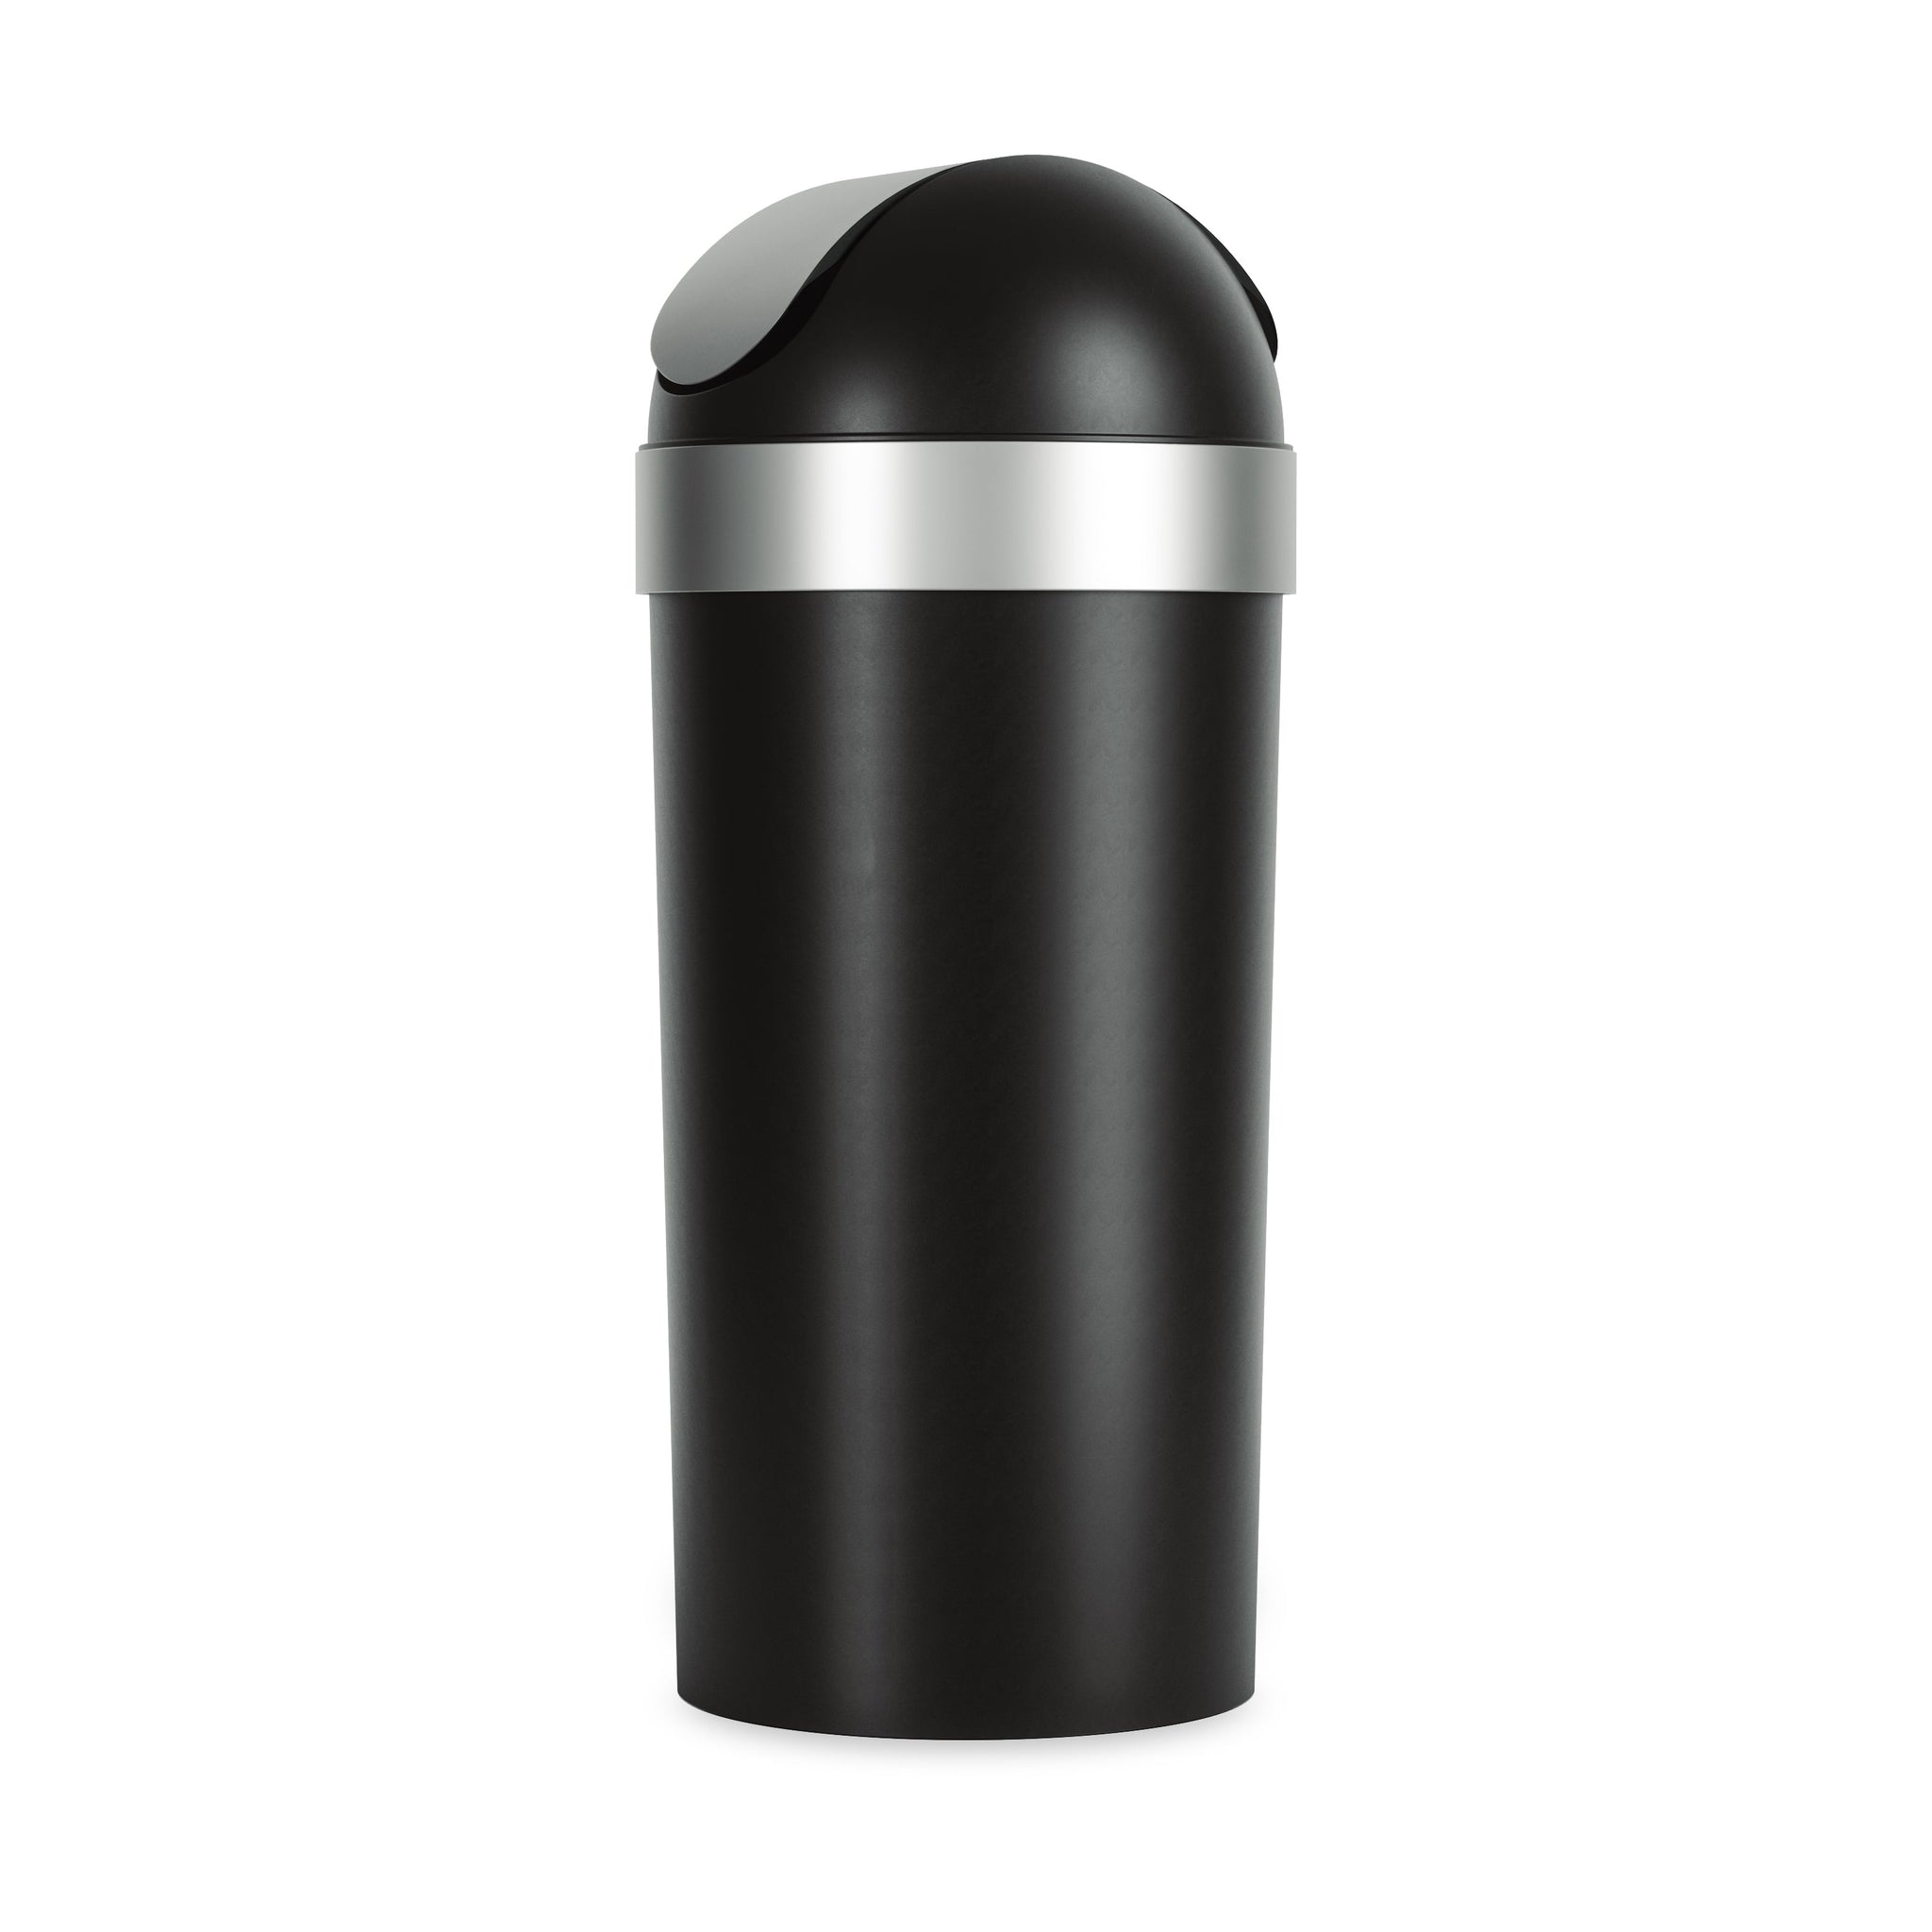 Venti 16-Gallon (62L) Trash Can with Swing Top Lid